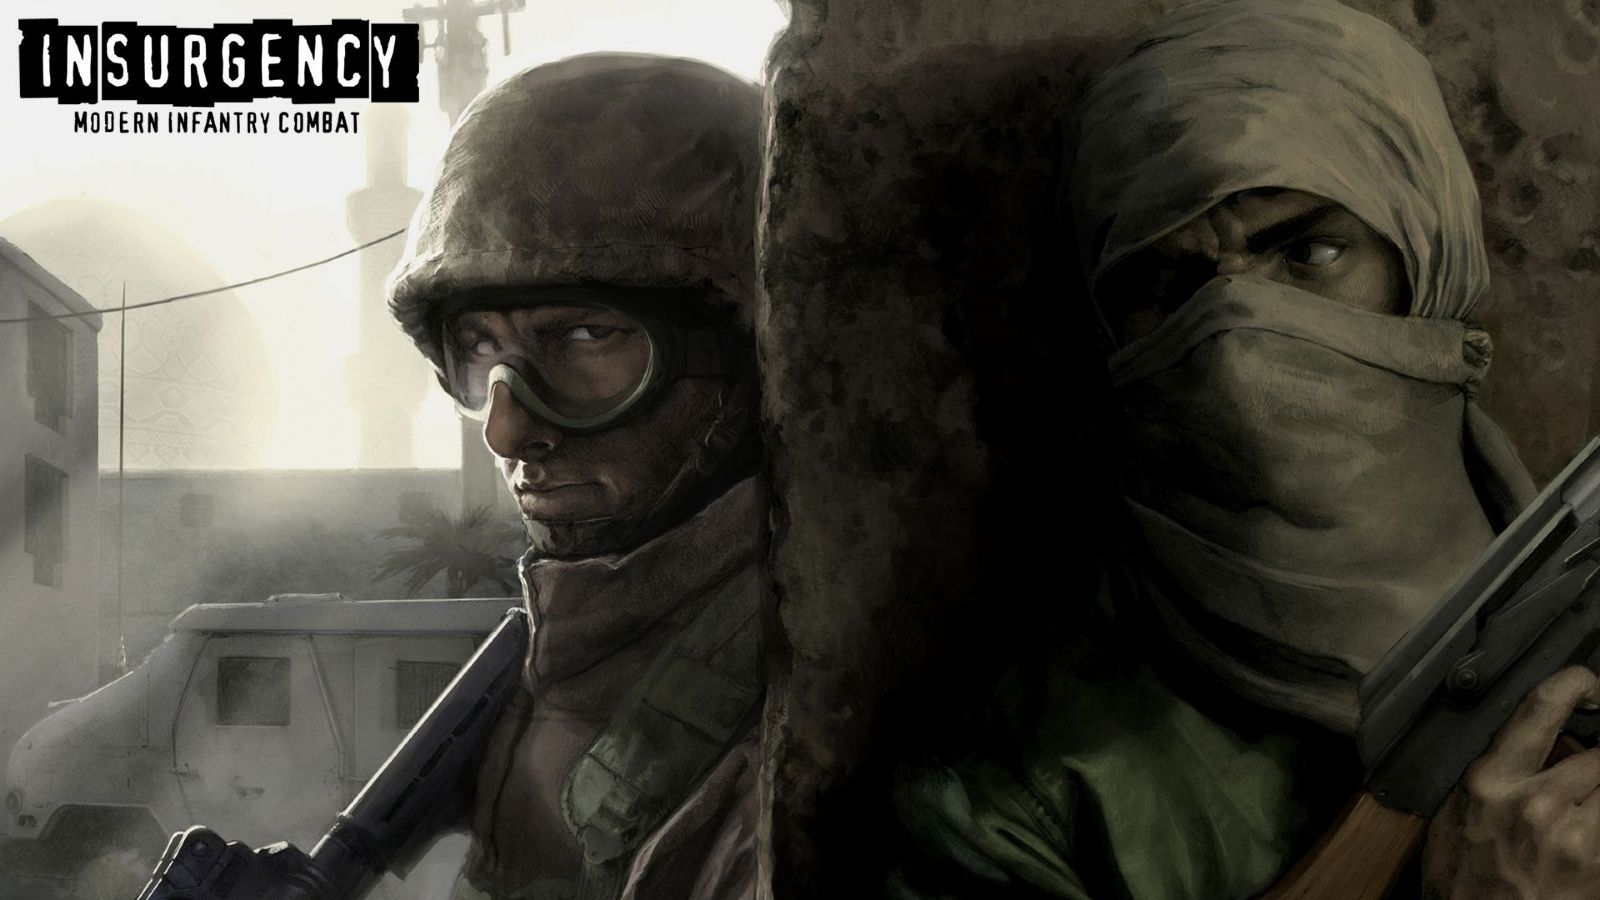 company of heroes: modern combat steam